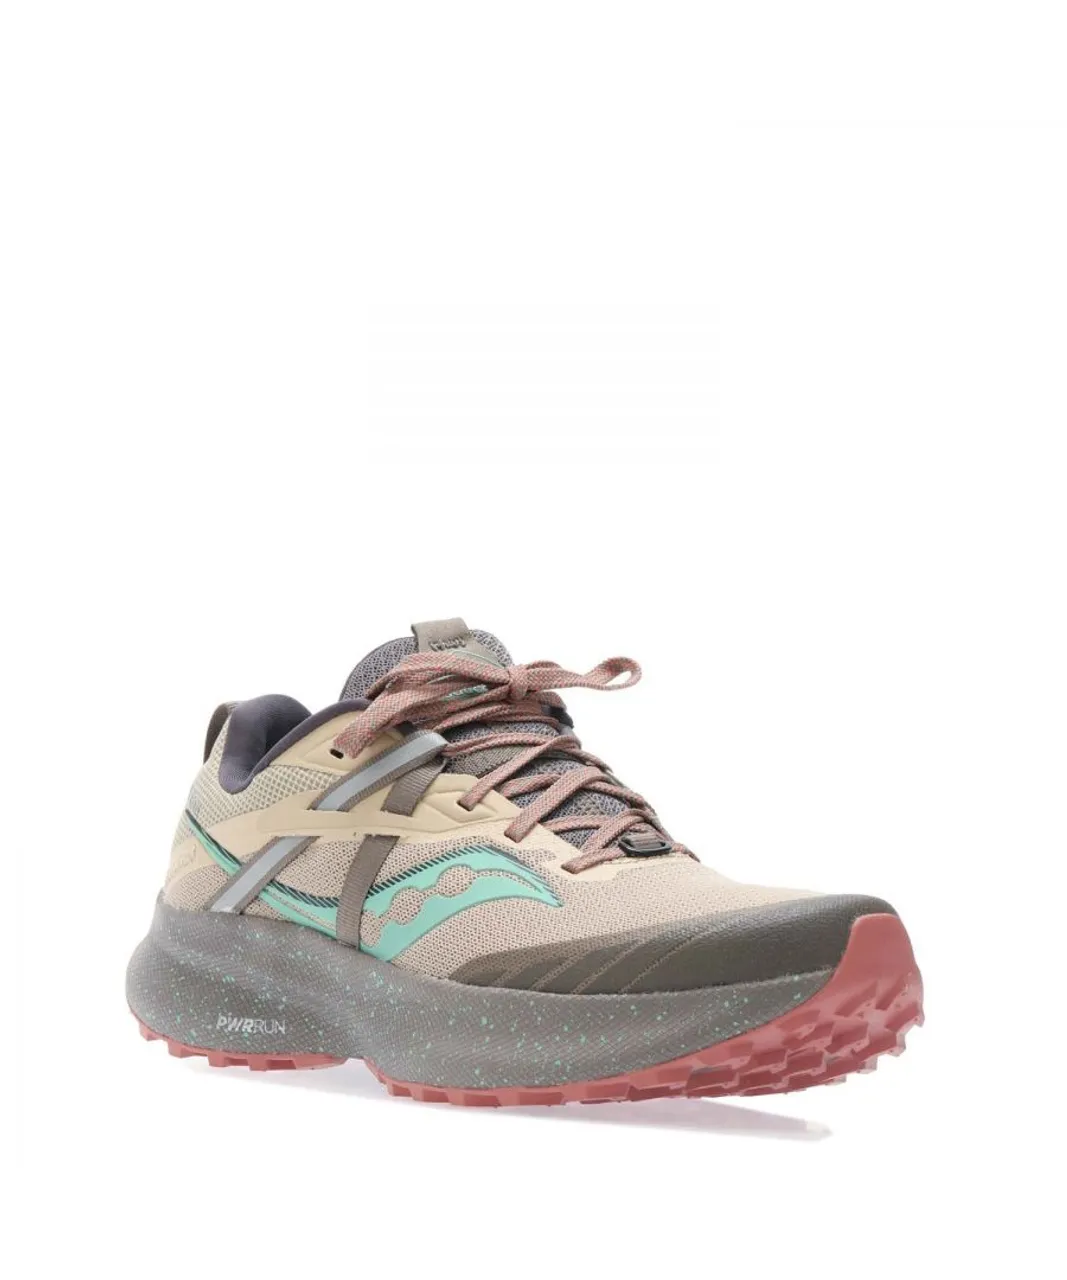 Saucony Womenss Ride 15 Running Shoes in Brown Mesh